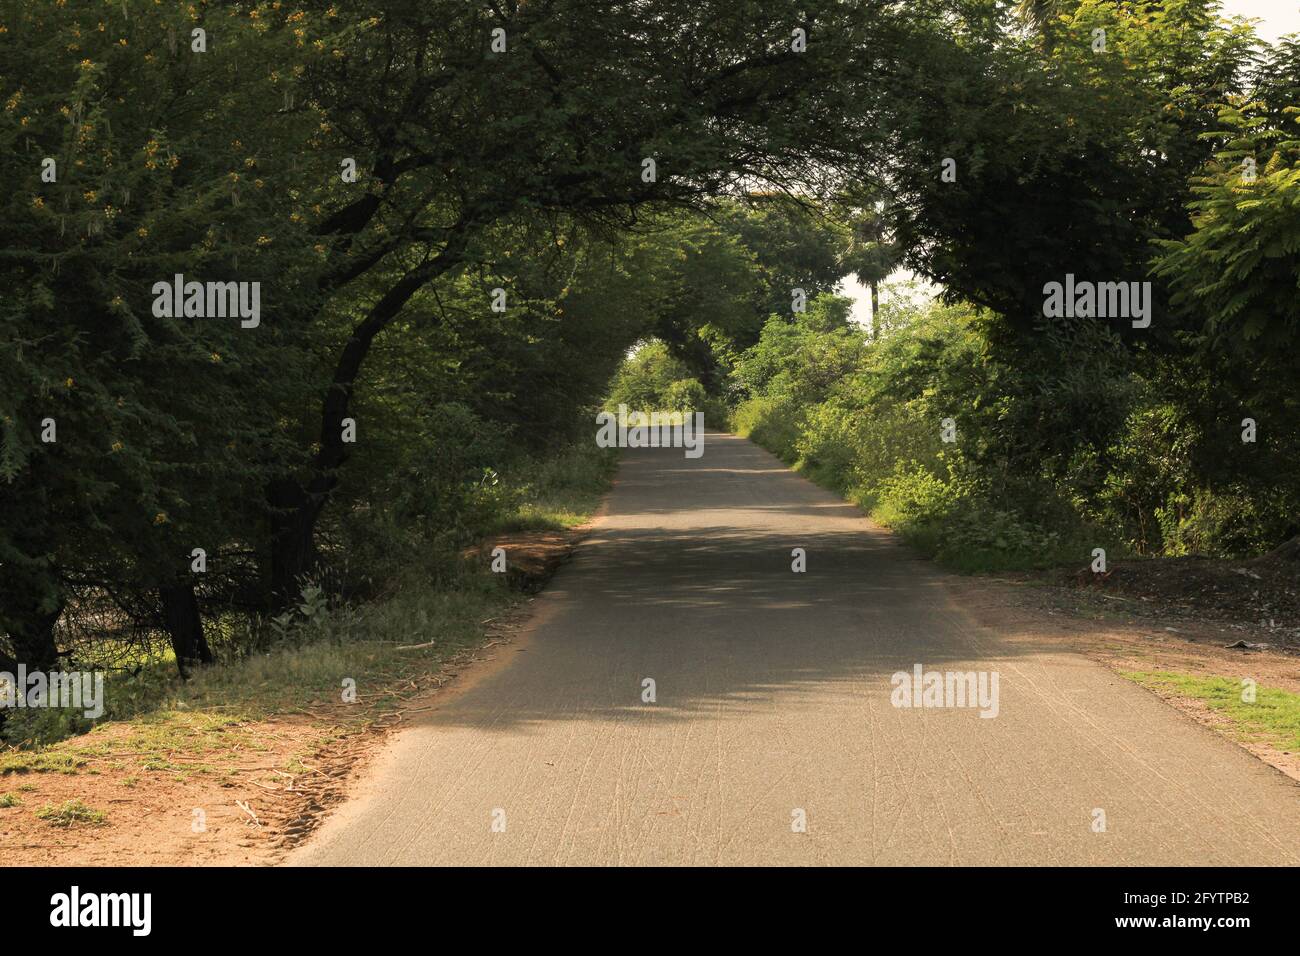 An empty road in wayof forest for walking or exercise piecefully Stock Photo